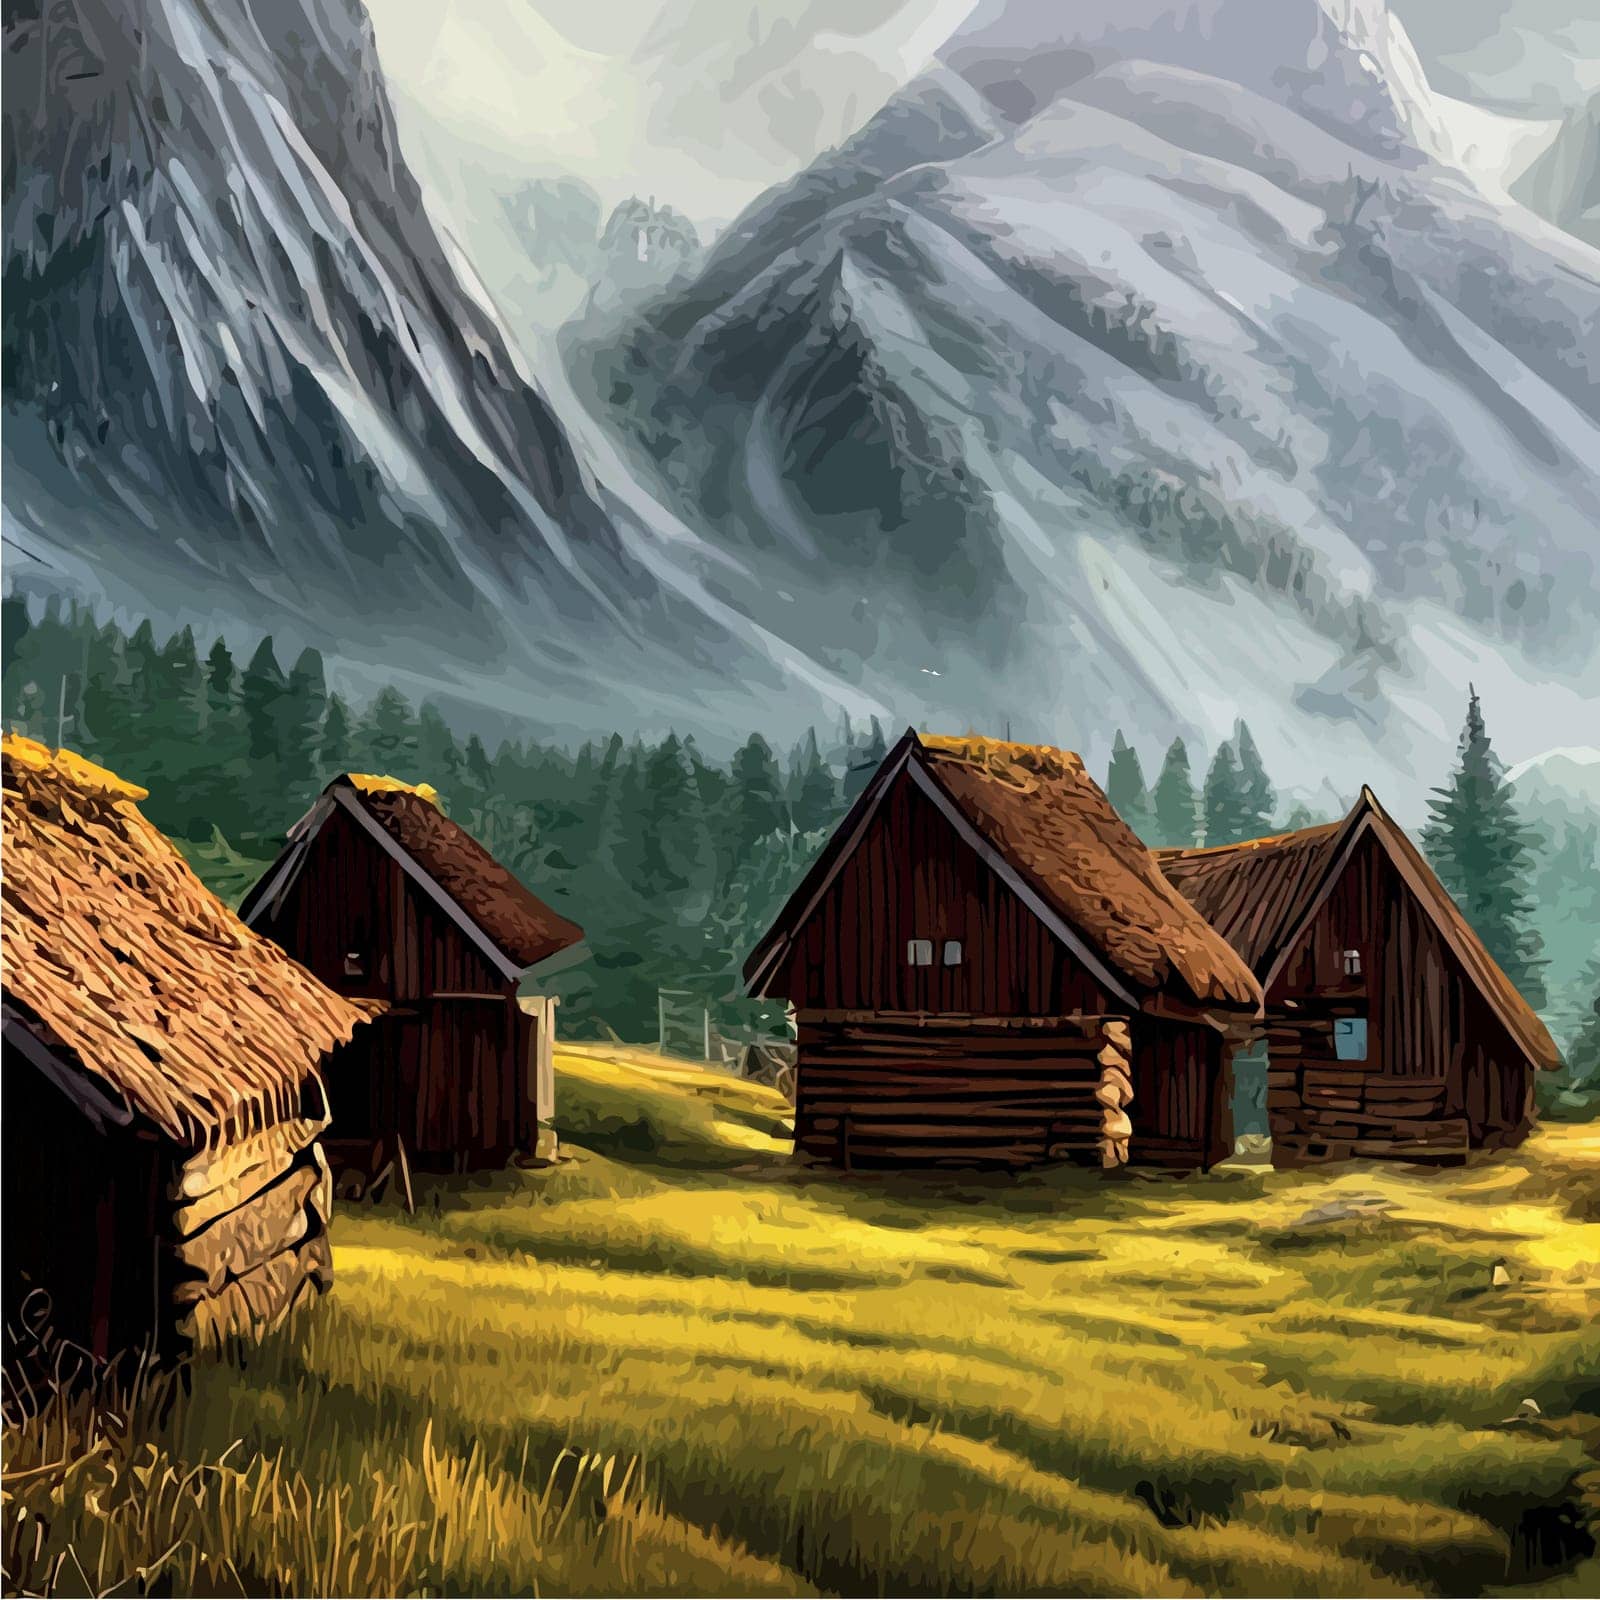 Landscape houses in nature against backdrop mountains, green meadows and trees. Vector illustrations rural architecture, huts surrounded by forests, Drawings for poster, background or cover